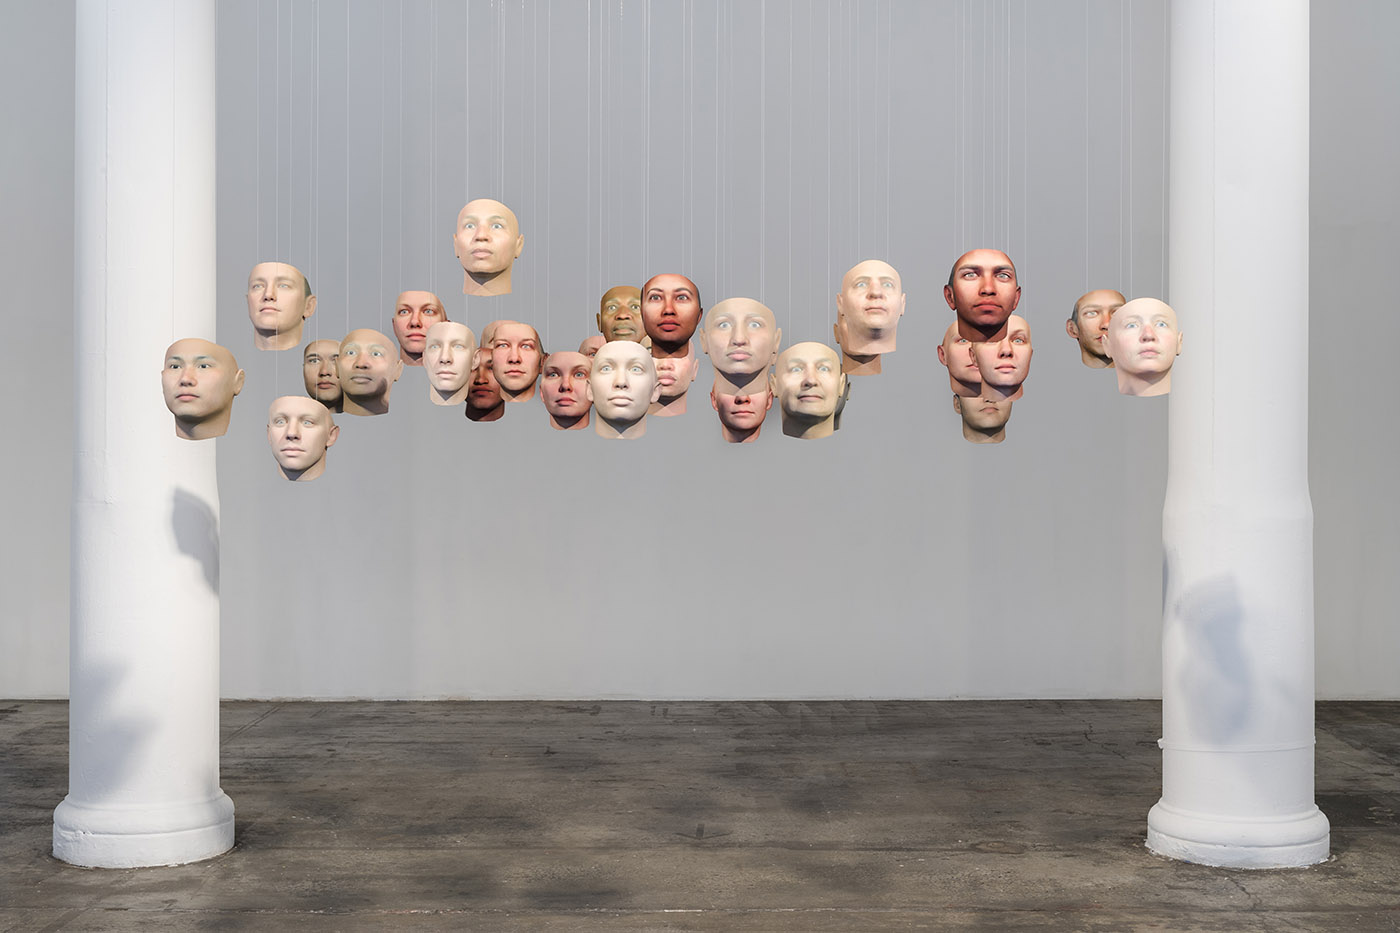 Many face masks hanging from a gallery ceiling